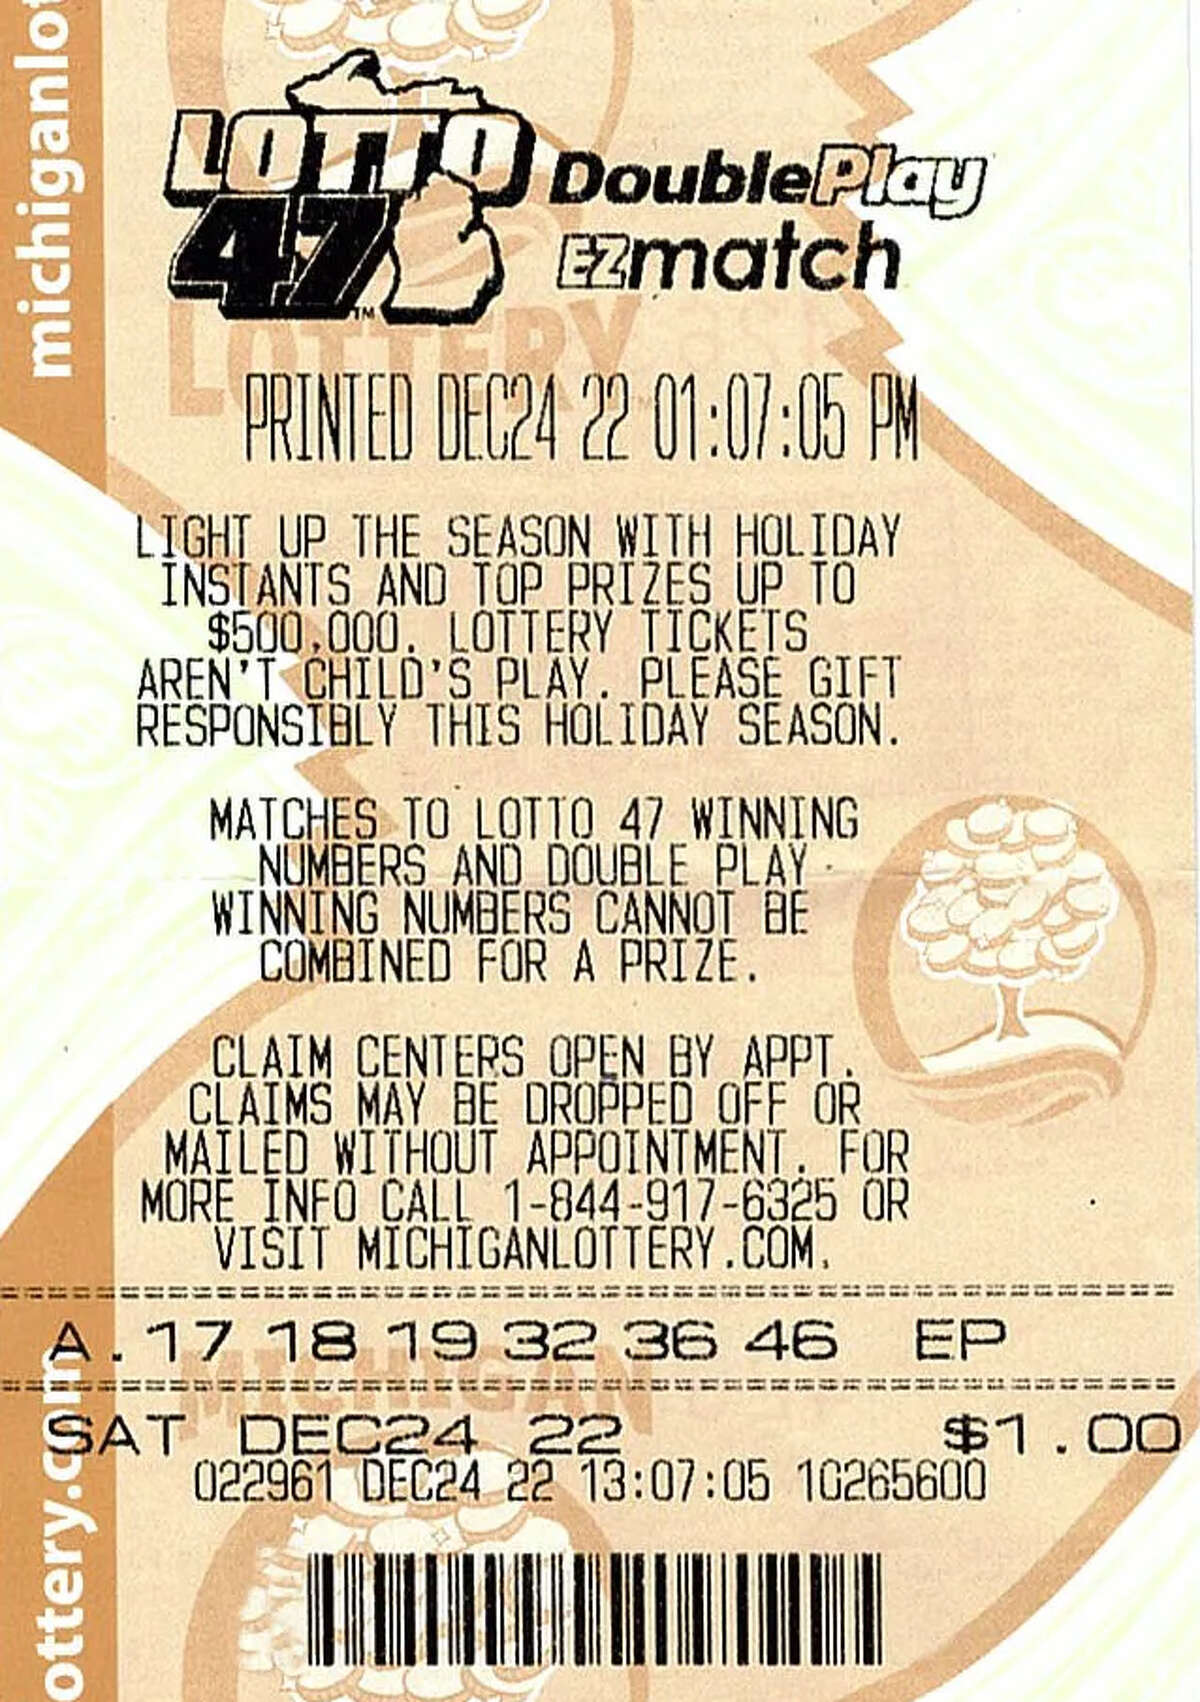 A Northern Michigan man won more than $1 million on Christmas Eve by playing the Michigan Lottery.